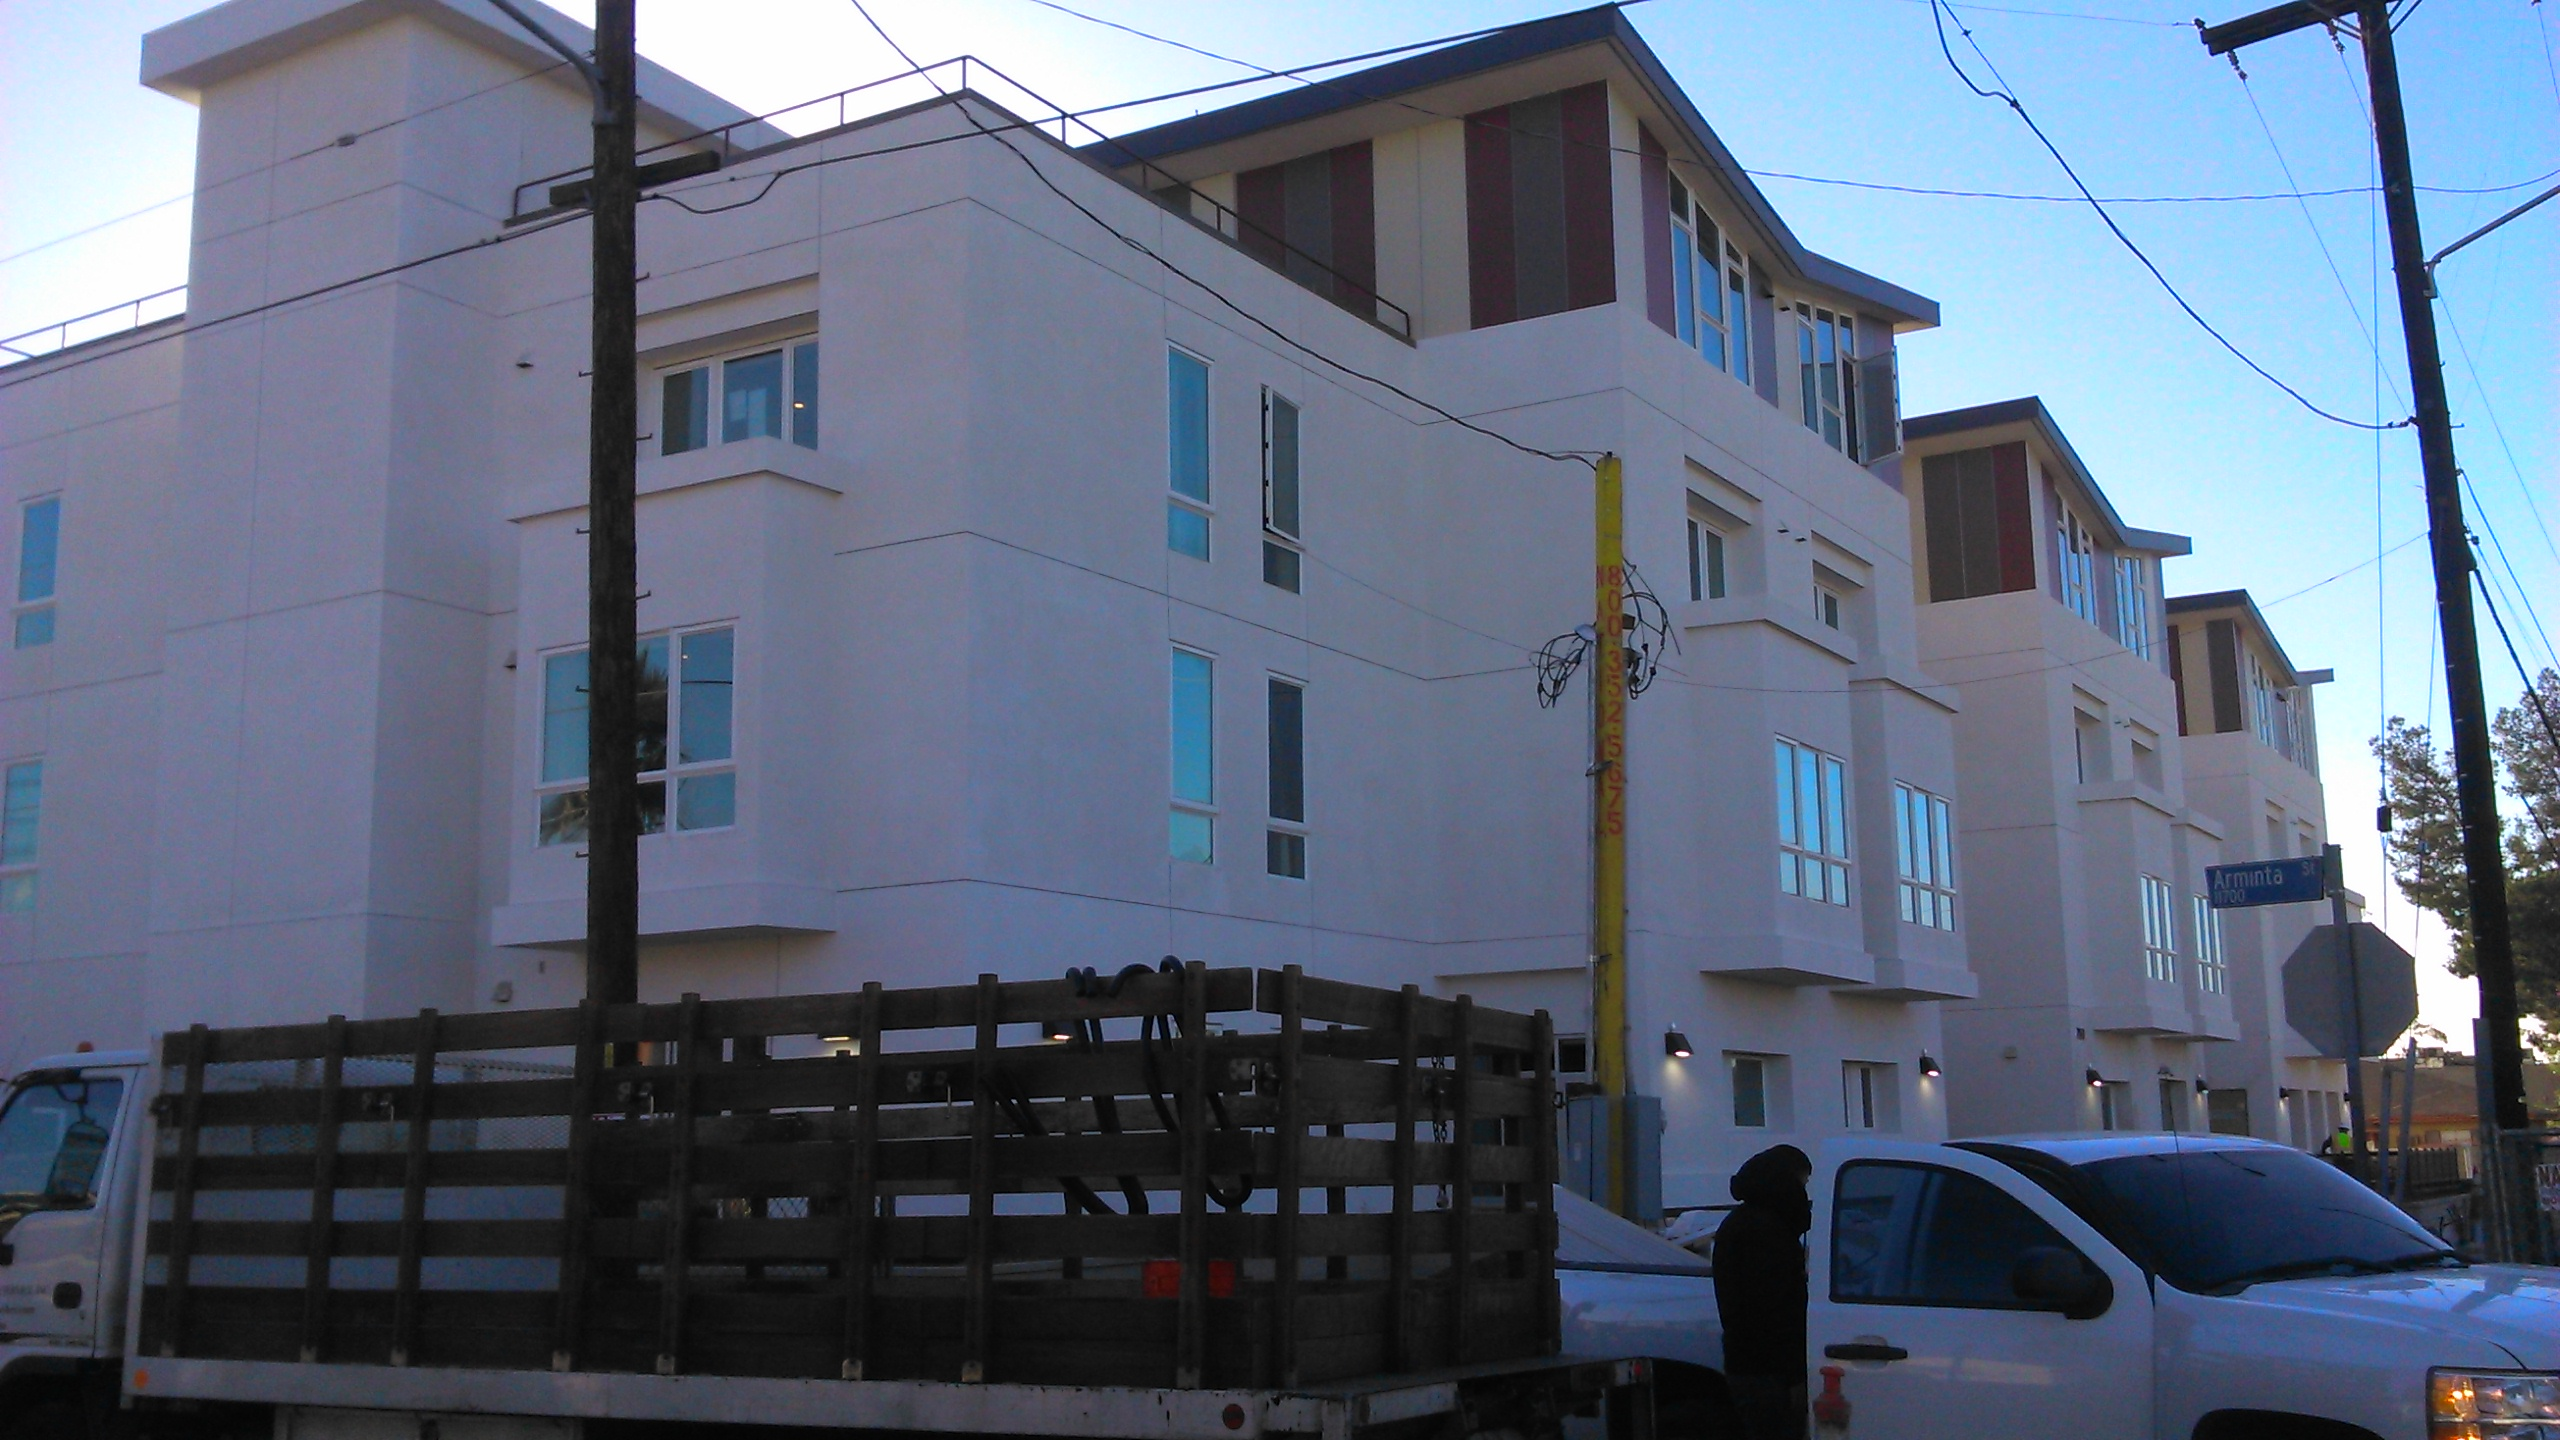 Front view of 2 floor building with a terrace. Truck parked in the front(not part of the unit).